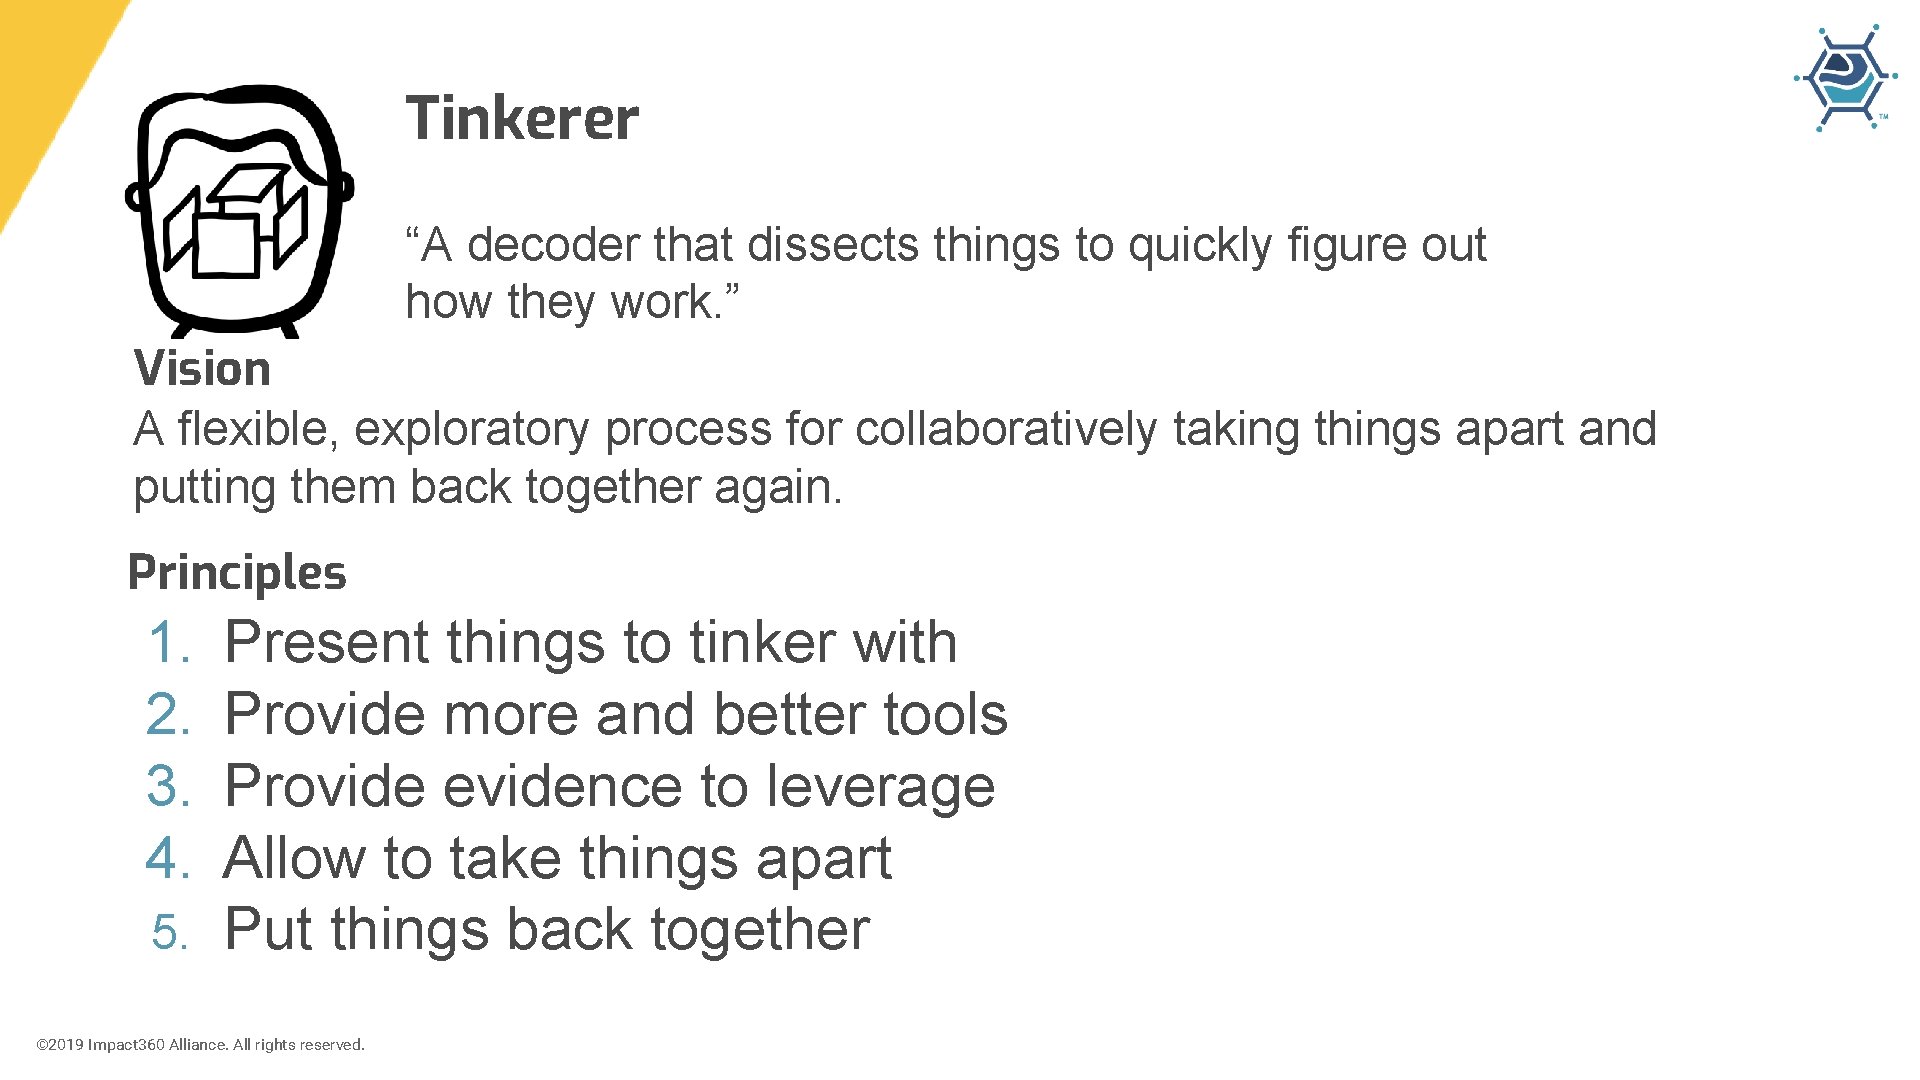 Tinkerer “A decoder that dissects things to quickly figure out how they work. ”